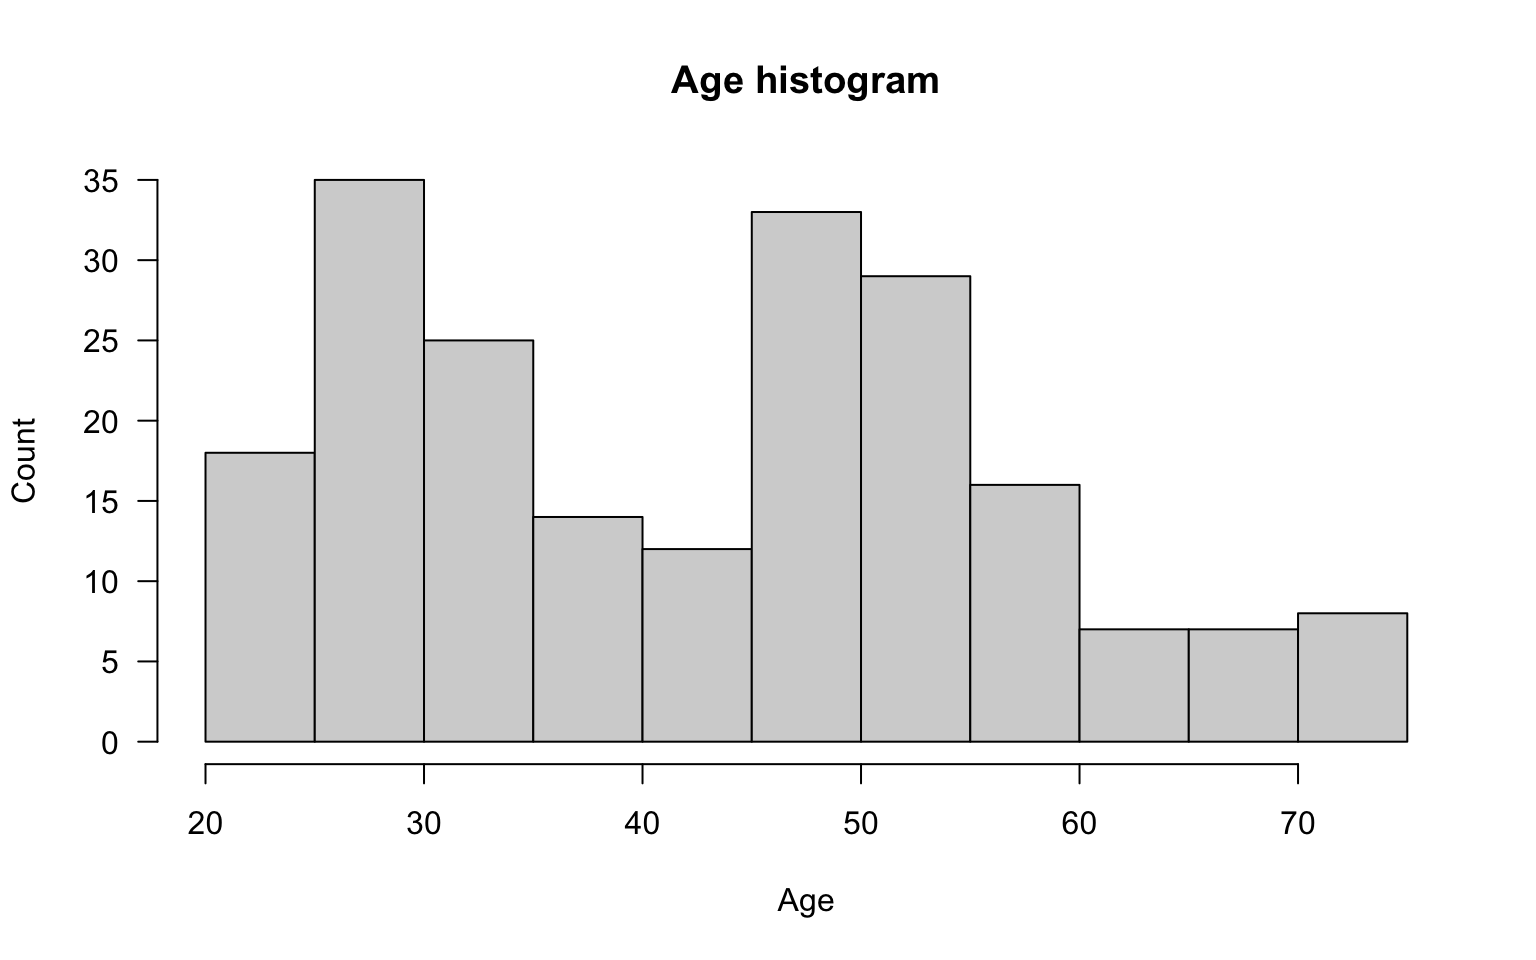 Histogram for the age variable.